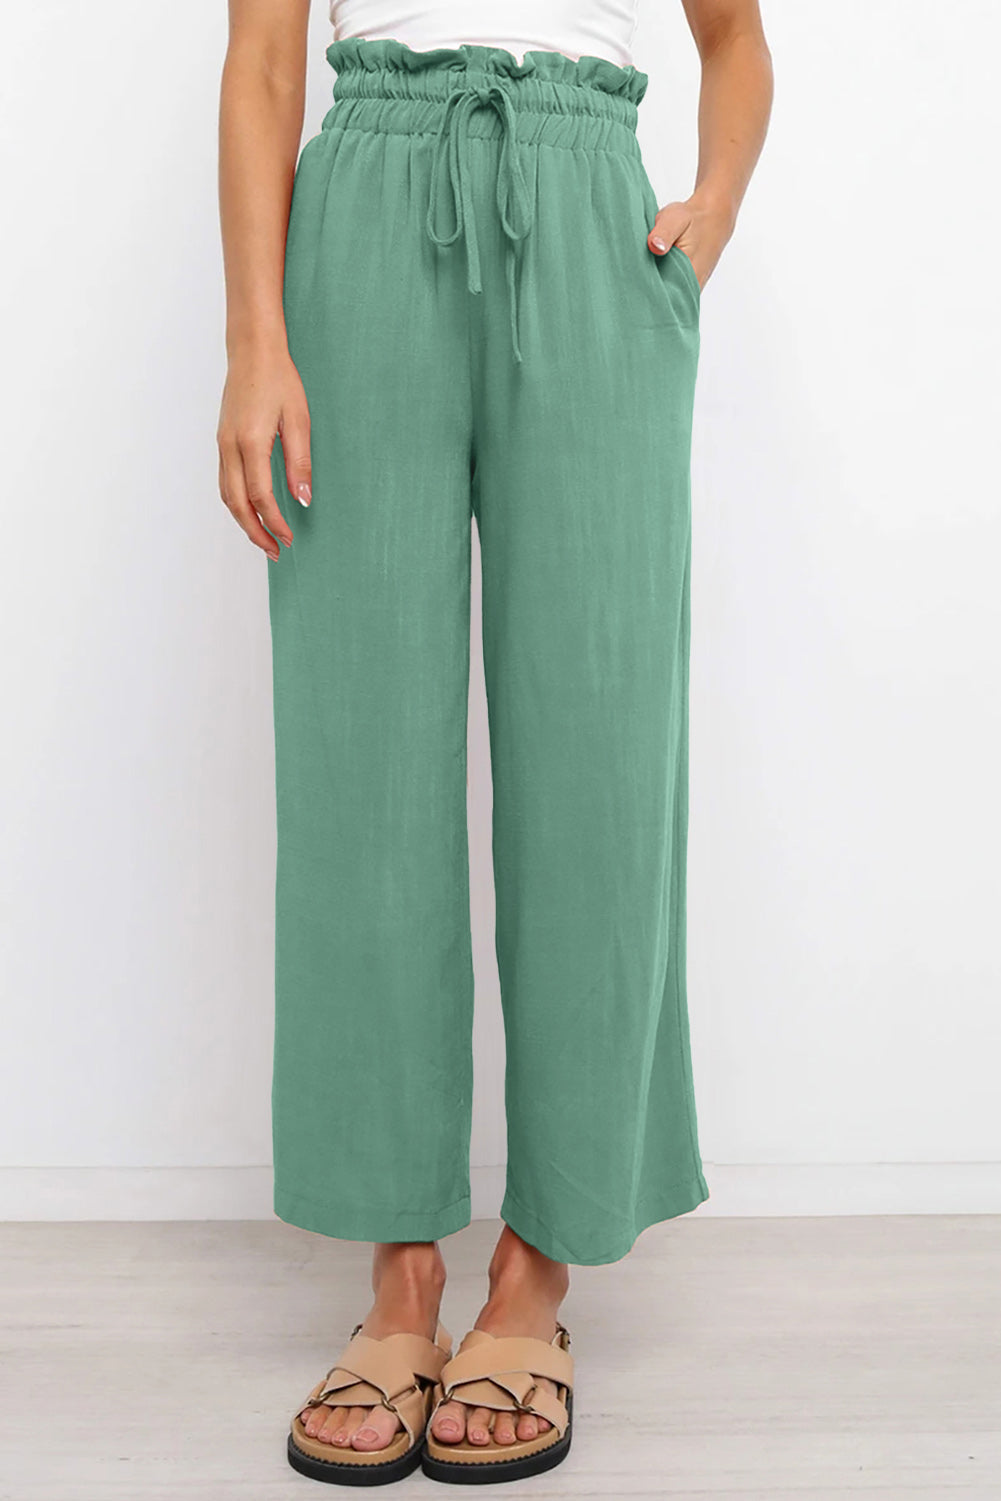 LC771296-209-S, LC771296-209-M, LC771296-209-L, LC771296-209-XL, Green Women's High Waist Paper Bag Straight Leg Cropped Long Pants with Pocket